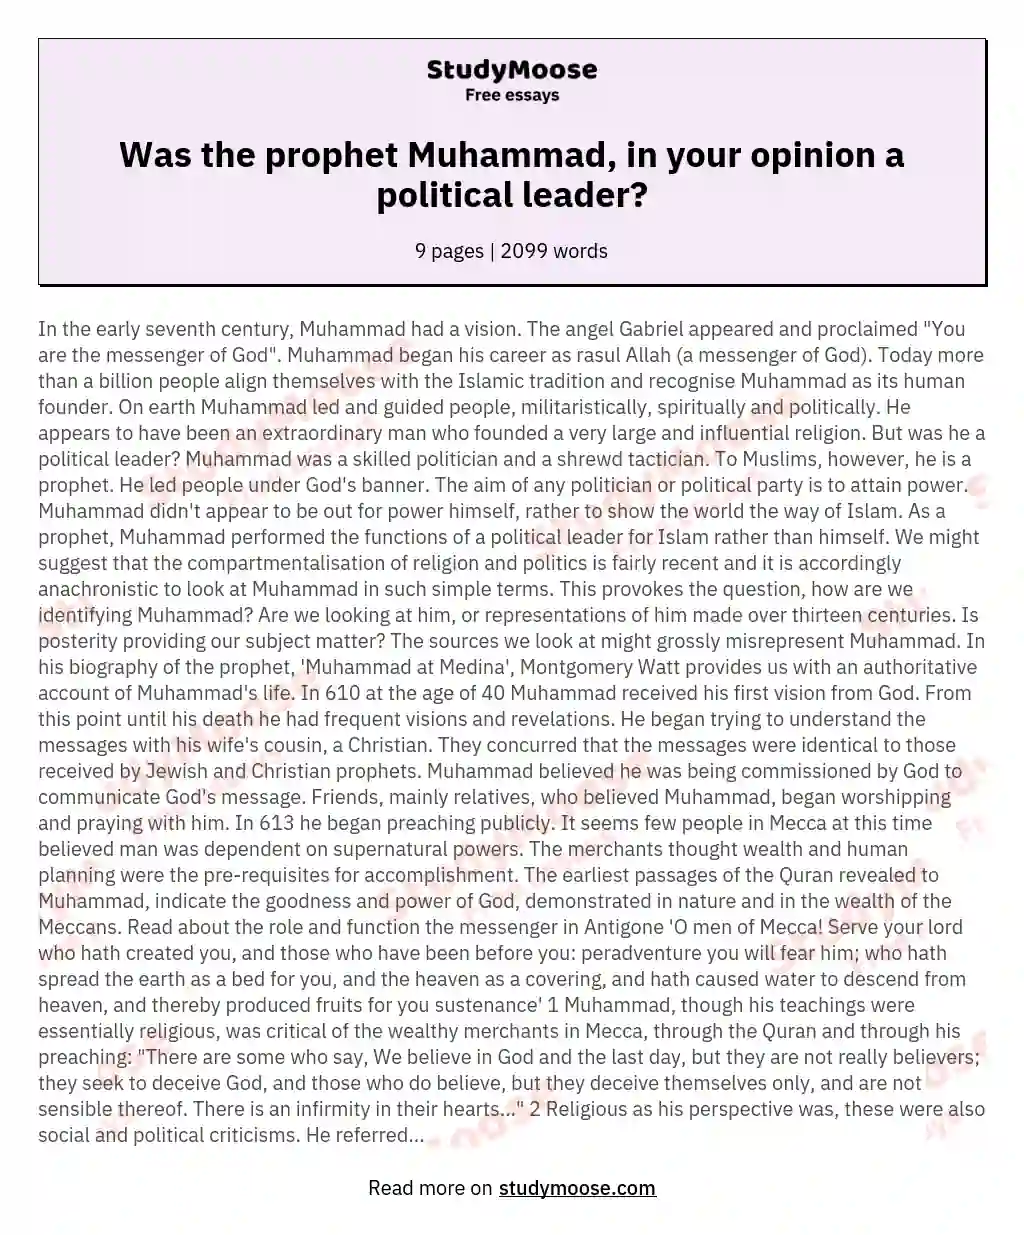 Was the prophet Muhammad, in your opinion a political leader?